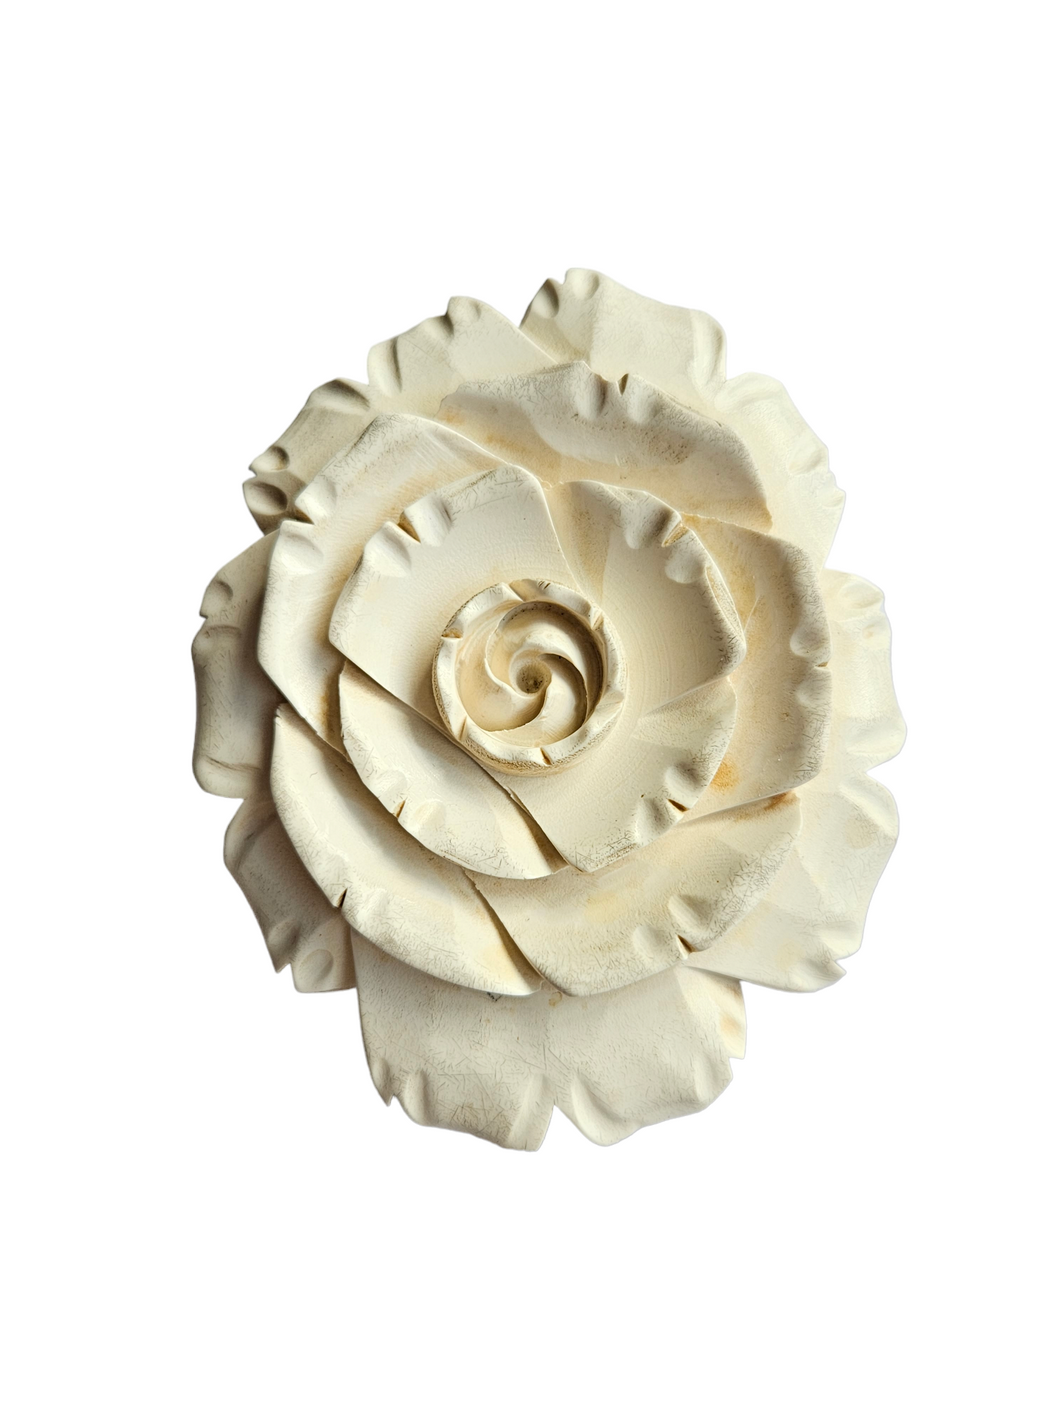 1940s HUGE Cream Carved Galalith Flower Brooch